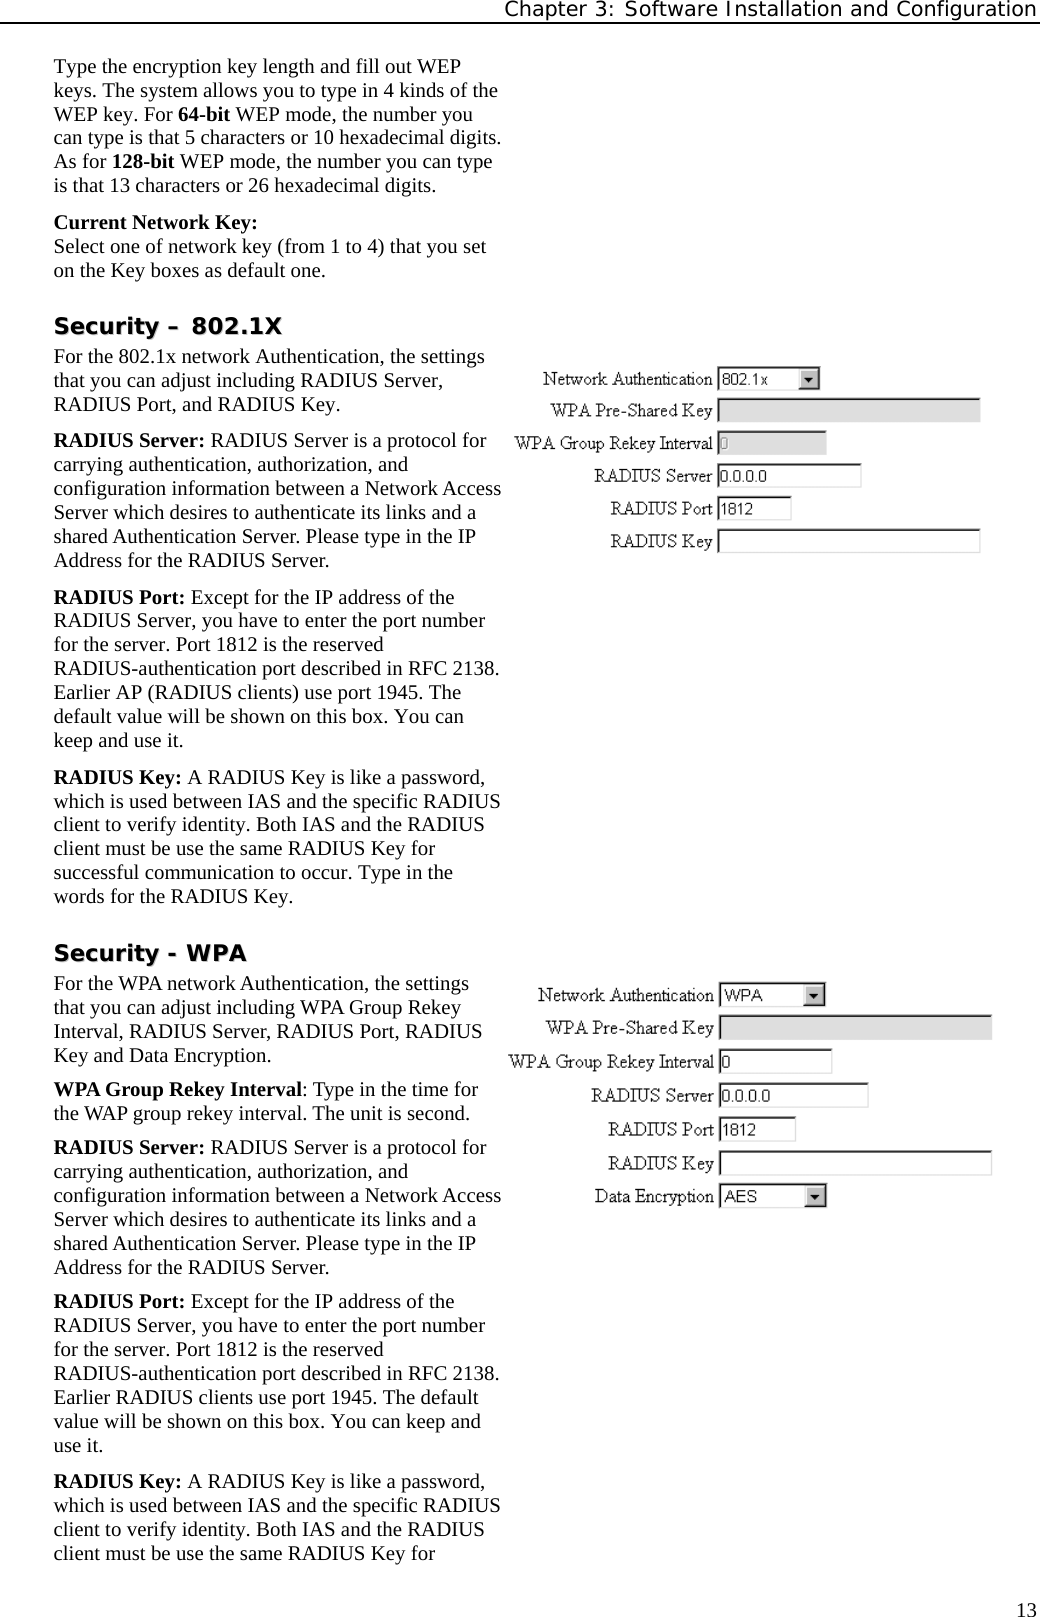 Chapter 3: Software Installation and Configuration  13Type the encryption key length and fill out WEP keys. The system allows you to type in 4 kinds of the WEP key. For 64-bit WEP mode, the number you can type is that 5 characters or 10 hexadecimal digits. As for 128-bit WEP mode, the number you can type is that 13 characters or 26 hexadecimal digits. Current Network Key: Select one of network key (from 1 to 4) that you set on the Key boxes as default one. SSeeccuurriittyy  ––  880022..11XX  For the 802.1x network Authentication, the settings that you can adjust including RADIUS Server, RADIUS Port, and RADIUS Key. RADIUS Server: RADIUS Server is a protocol for carrying authentication, authorization, and configuration information between a Network Access Server which desires to authenticate its links and a shared Authentication Server. Please type in the IP Address for the RADIUS Server. RADIUS Port: Except for the IP address of the RADIUS Server, you have to enter the port number for the server. Port 1812 is the reserved RADIUS-authentication port described in RFC 2138. Earlier AP (RADIUS clients) use port 1945. The default value will be shown on this box. You can keep and use it. RADIUS Key: A RADIUS Key is like a password, which is used between IAS and the specific RADIUS client to verify identity. Both IAS and the RADIUS client must be use the same RADIUS Key for successful communication to occur. Type in the words for the RADIUS Key. SSeeccuurriittyy  --  WWPPAA  For the WPA network Authentication, the settings that you can adjust including WPA Group Rekey Interval, RADIUS Server, RADIUS Port, RADIUS Key and Data Encryption. WPA Group Rekey Interval: Type in the time for the WAP group rekey interval. The unit is second. RADIUS Server: RADIUS Server is a protocol for carrying authentication, authorization, and configuration information between a Network Access Server which desires to authenticate its links and a shared Authentication Server. Please type in the IP Address for the RADIUS Server. RADIUS Port: Except for the IP address of the RADIUS Server, you have to enter the port number for the server. Port 1812 is the reserved RADIUS-authentication port described in RFC 2138. Earlier RADIUS clients use port 1945. The default value will be shown on this box. You can keep and use it. RADIUS Key: A RADIUS Key is like a password, which is used between IAS and the specific RADIUS client to verify identity. Both IAS and the RADIUS client must be use the same RADIUS Key for 